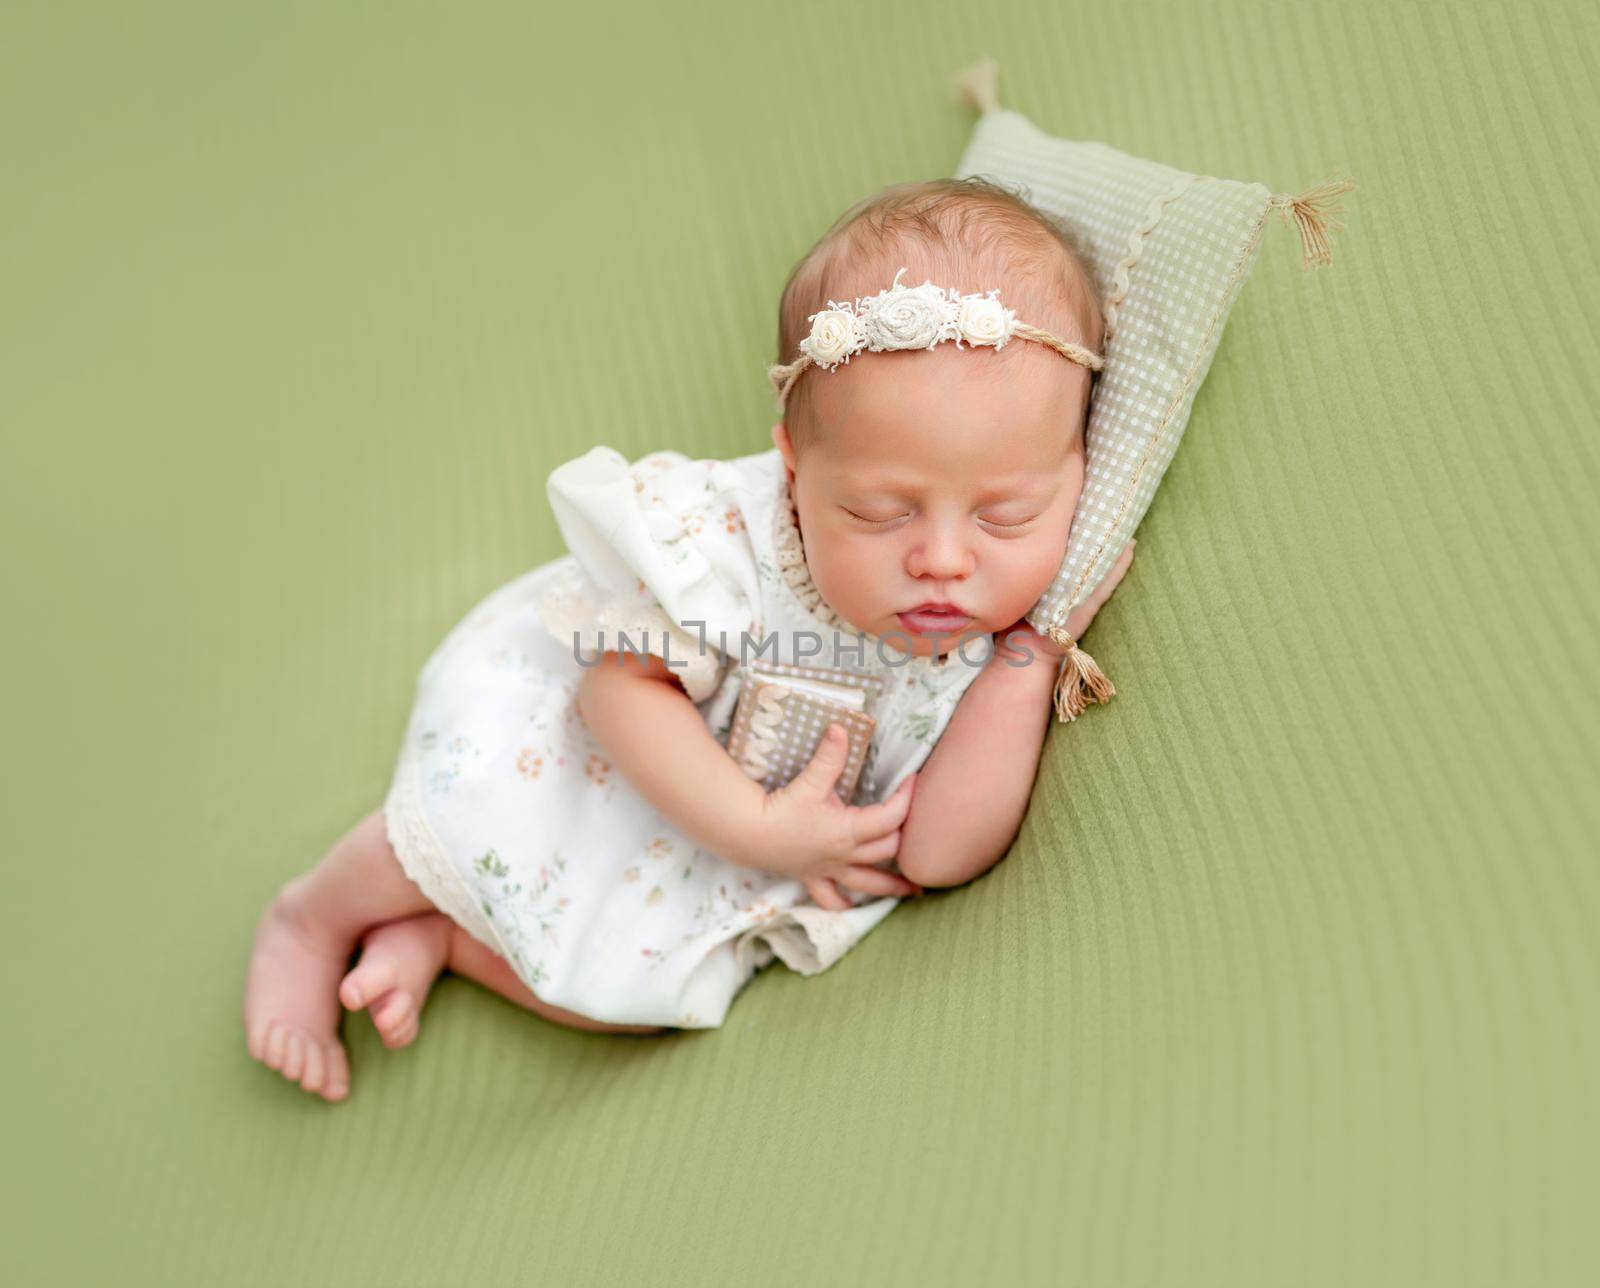 Charming newborn resting on tiny pillow holding small book